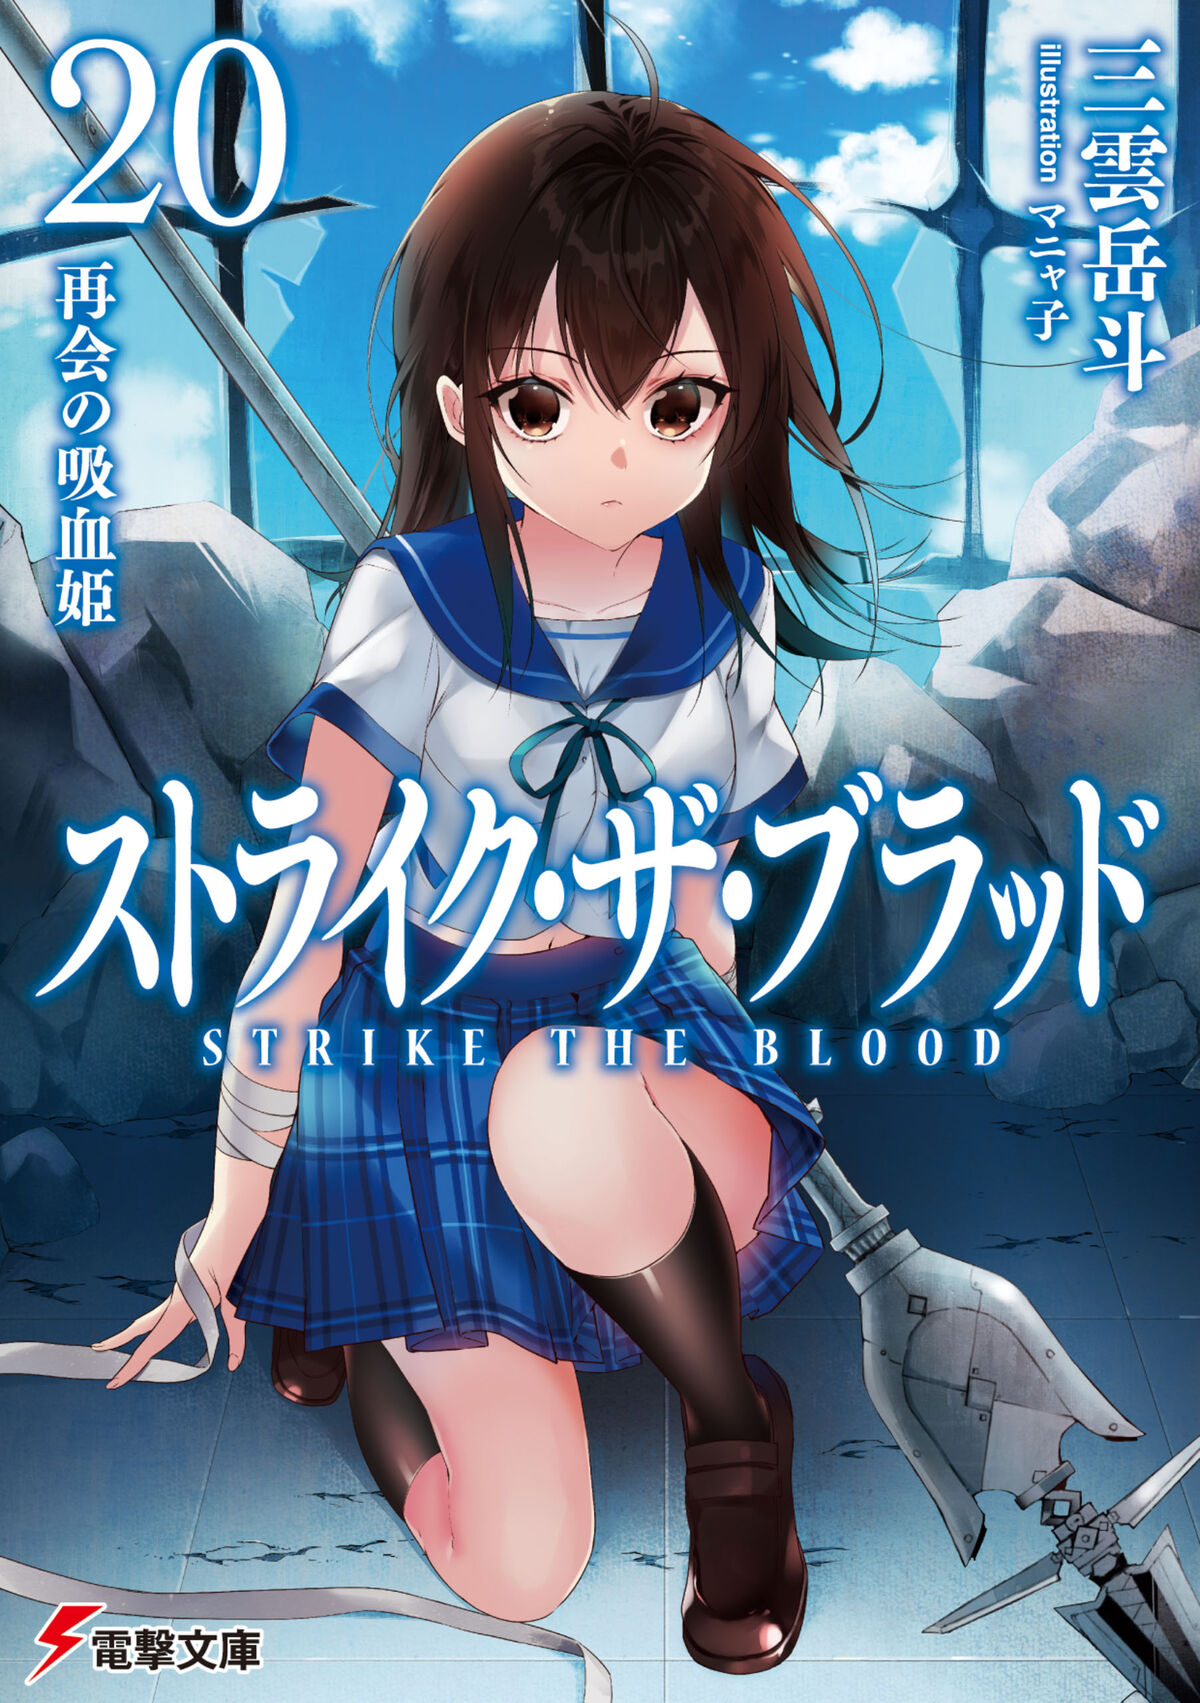 Strike the blood Ln series will end with 22nd volume, Anime 4th season will  adapt remaining novels with each novel adapted in 2 episodes. : r/anime